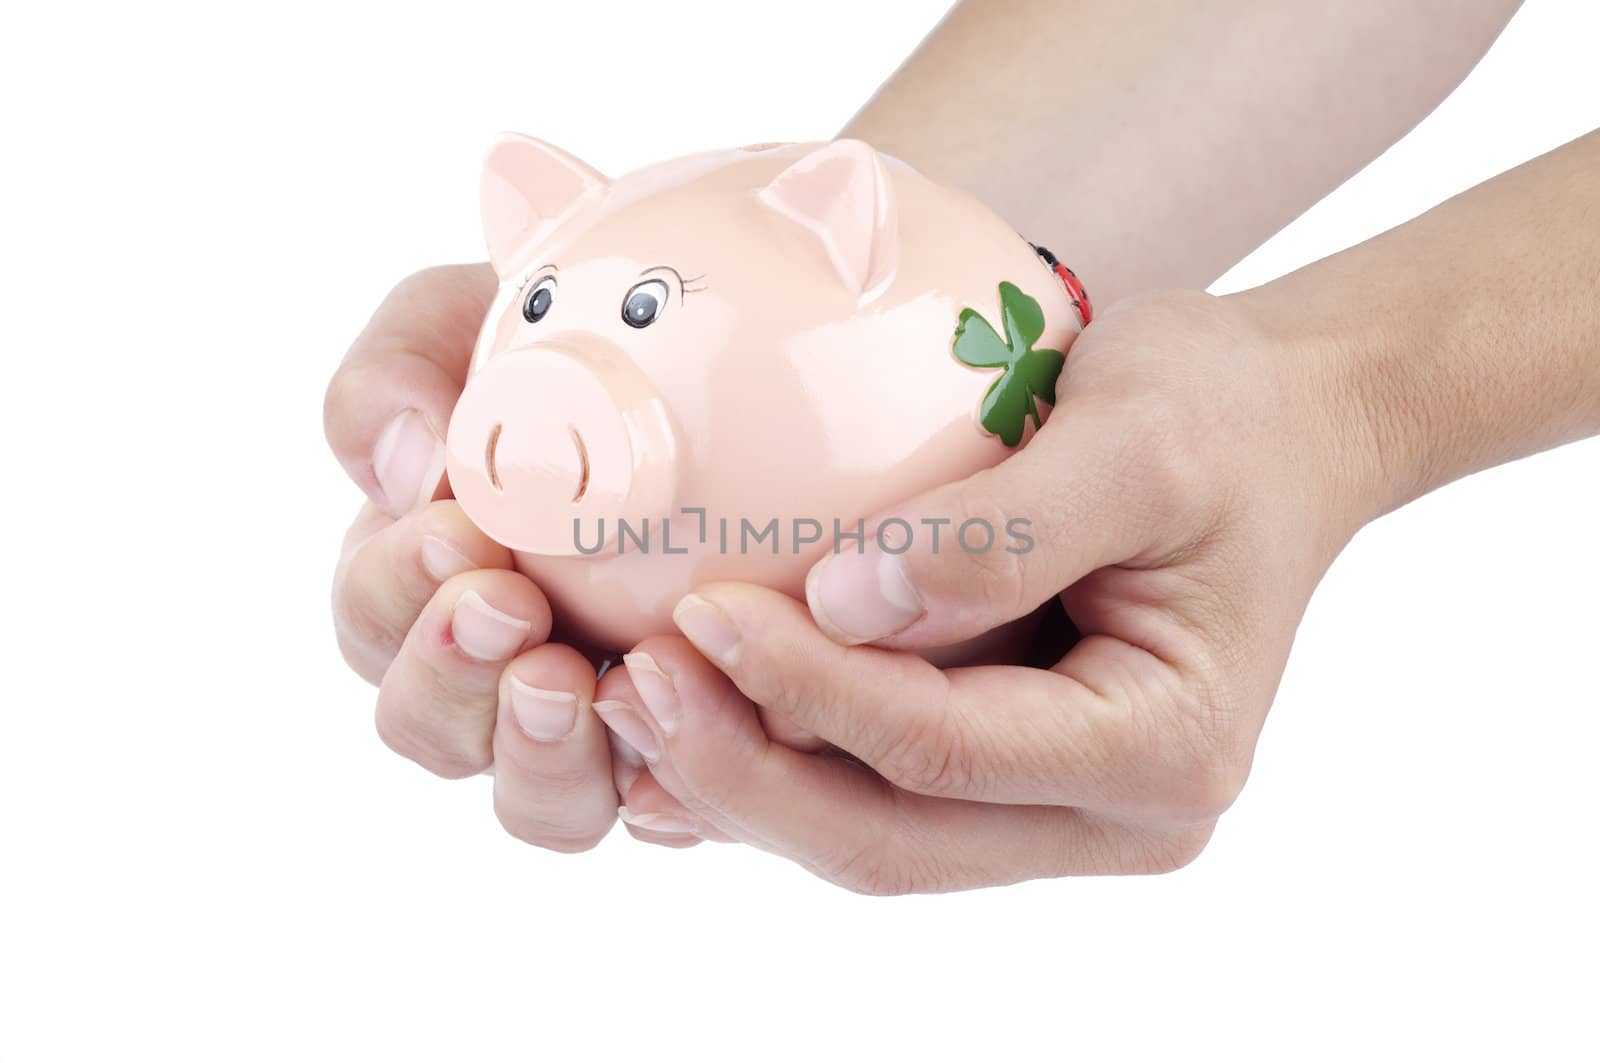 Protecting money in a piggy bank